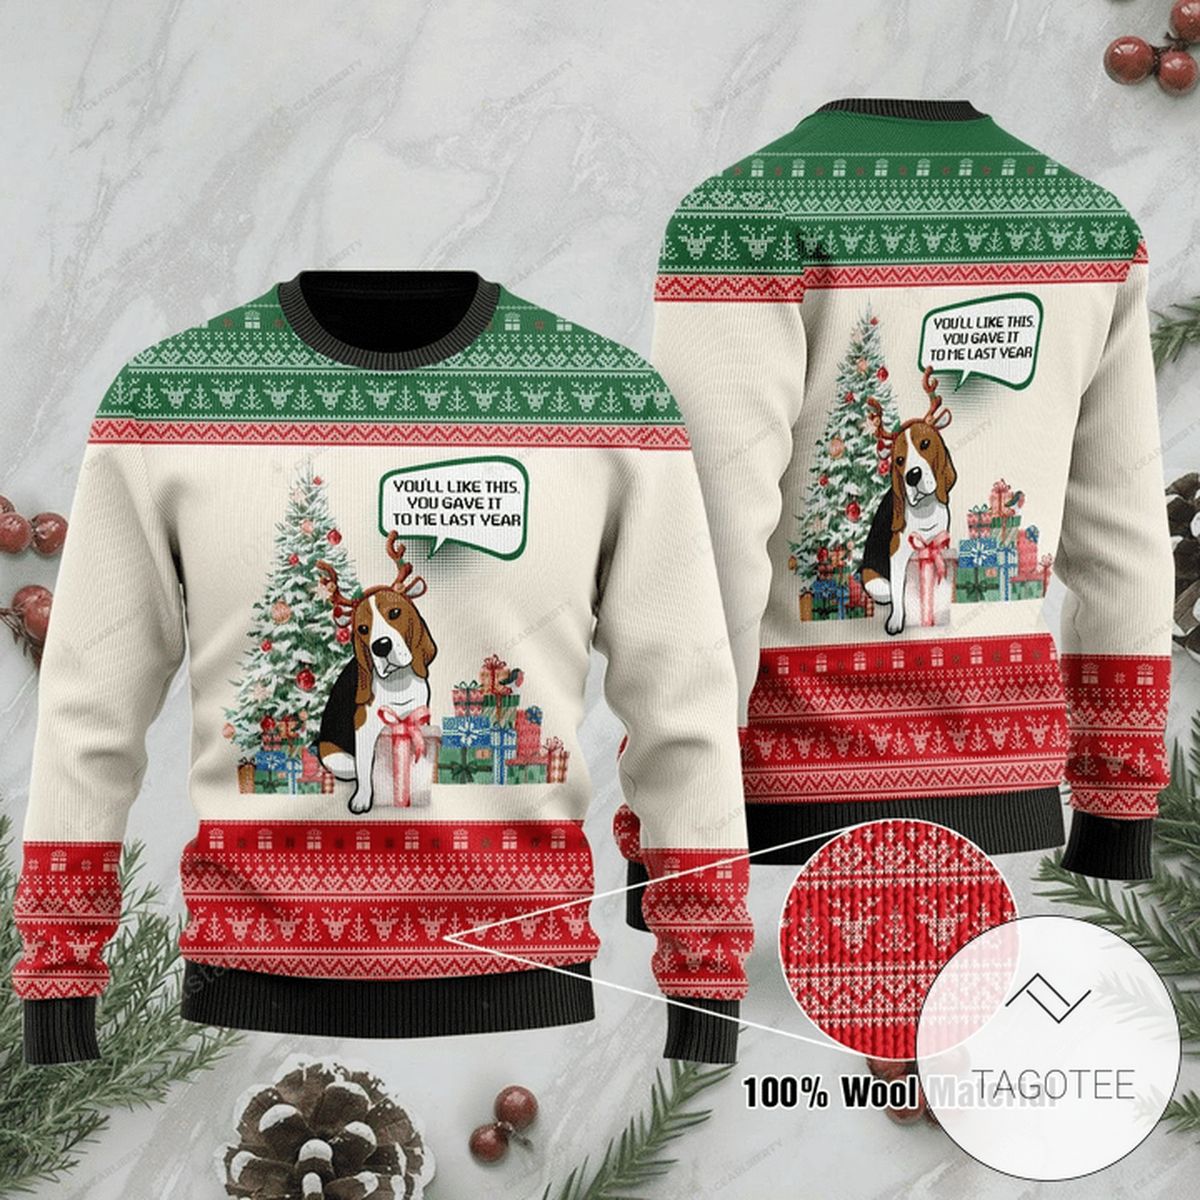 You'll Like This You Gave It To Me Last Year Ugly Christmas Sweater